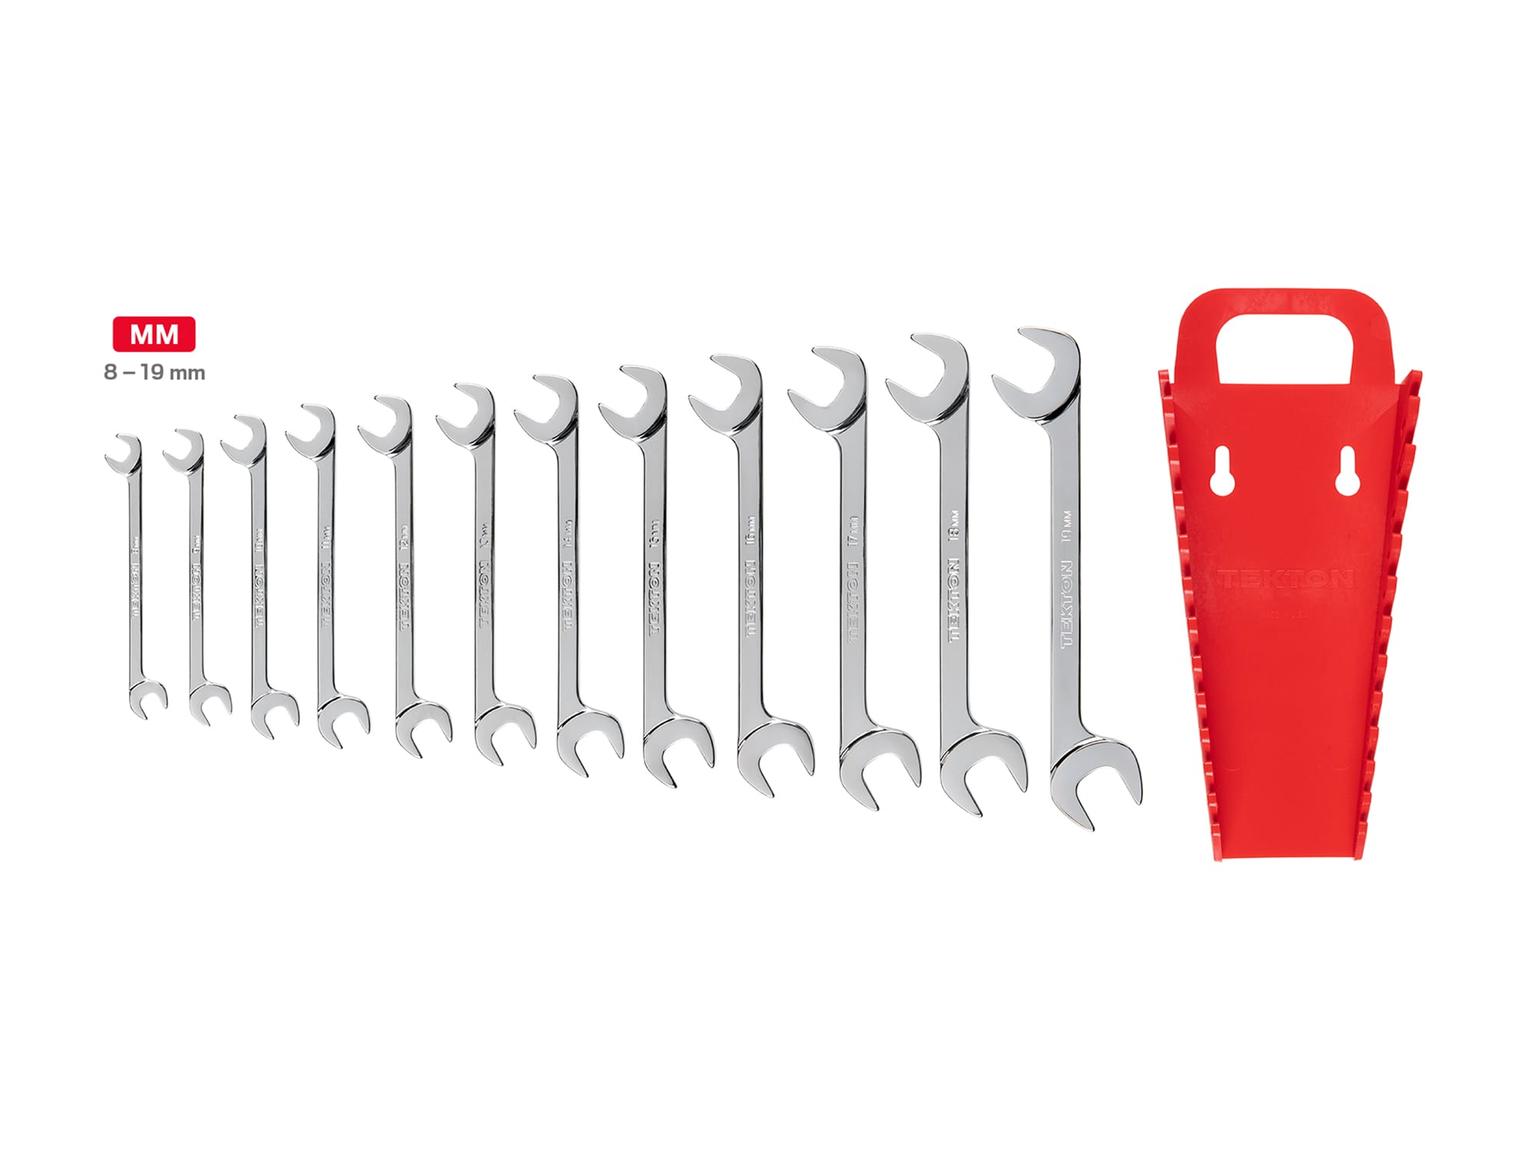 TEKTON WAE91201-T Angle Head Open End Wrench Set with Holder, 12-Piece (8 - 19 mm)